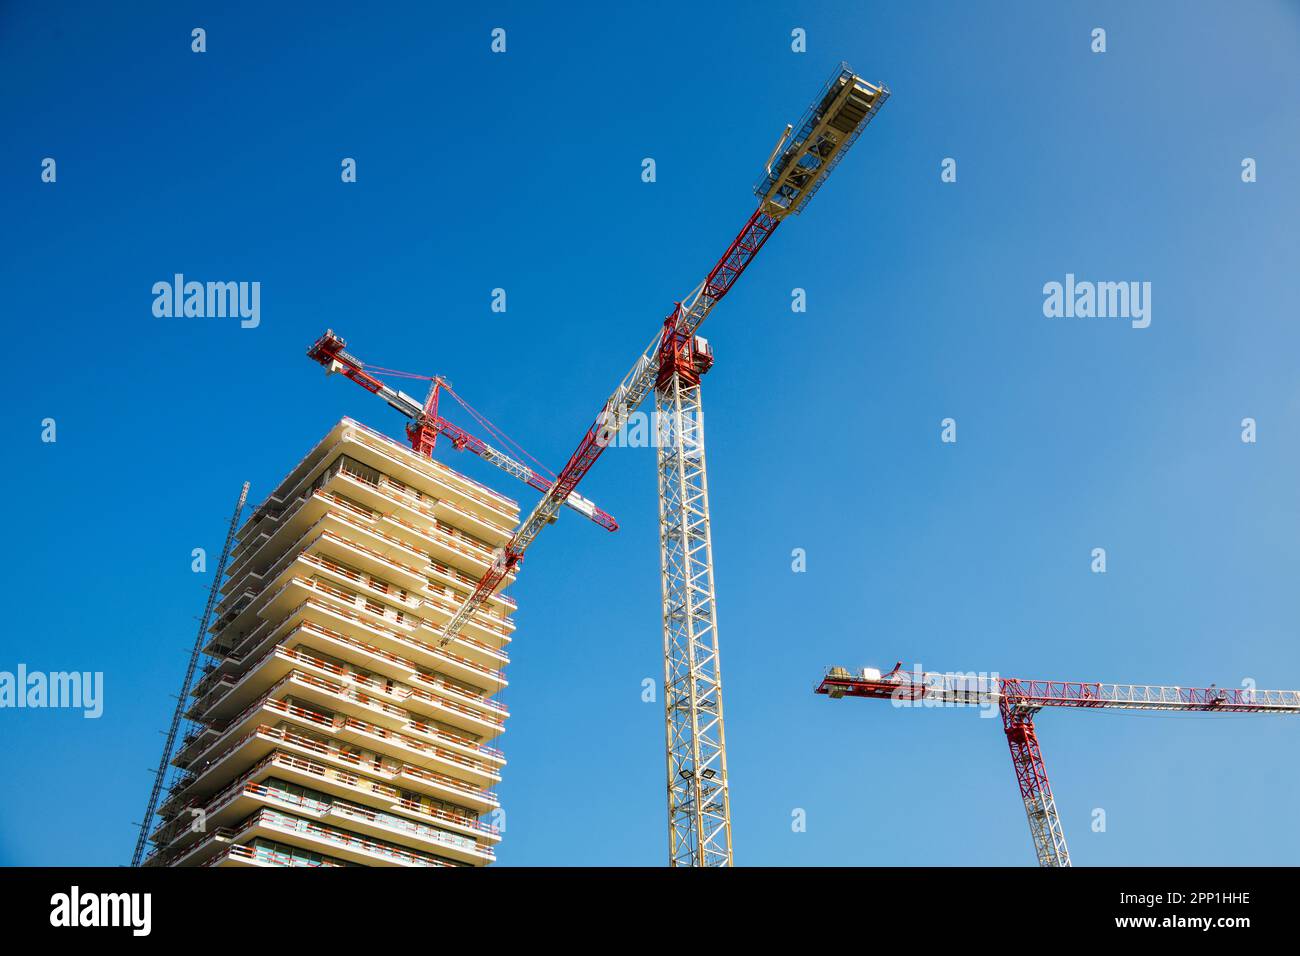 Construction cranes at a multi-story house building site, blue sky Stock Photo